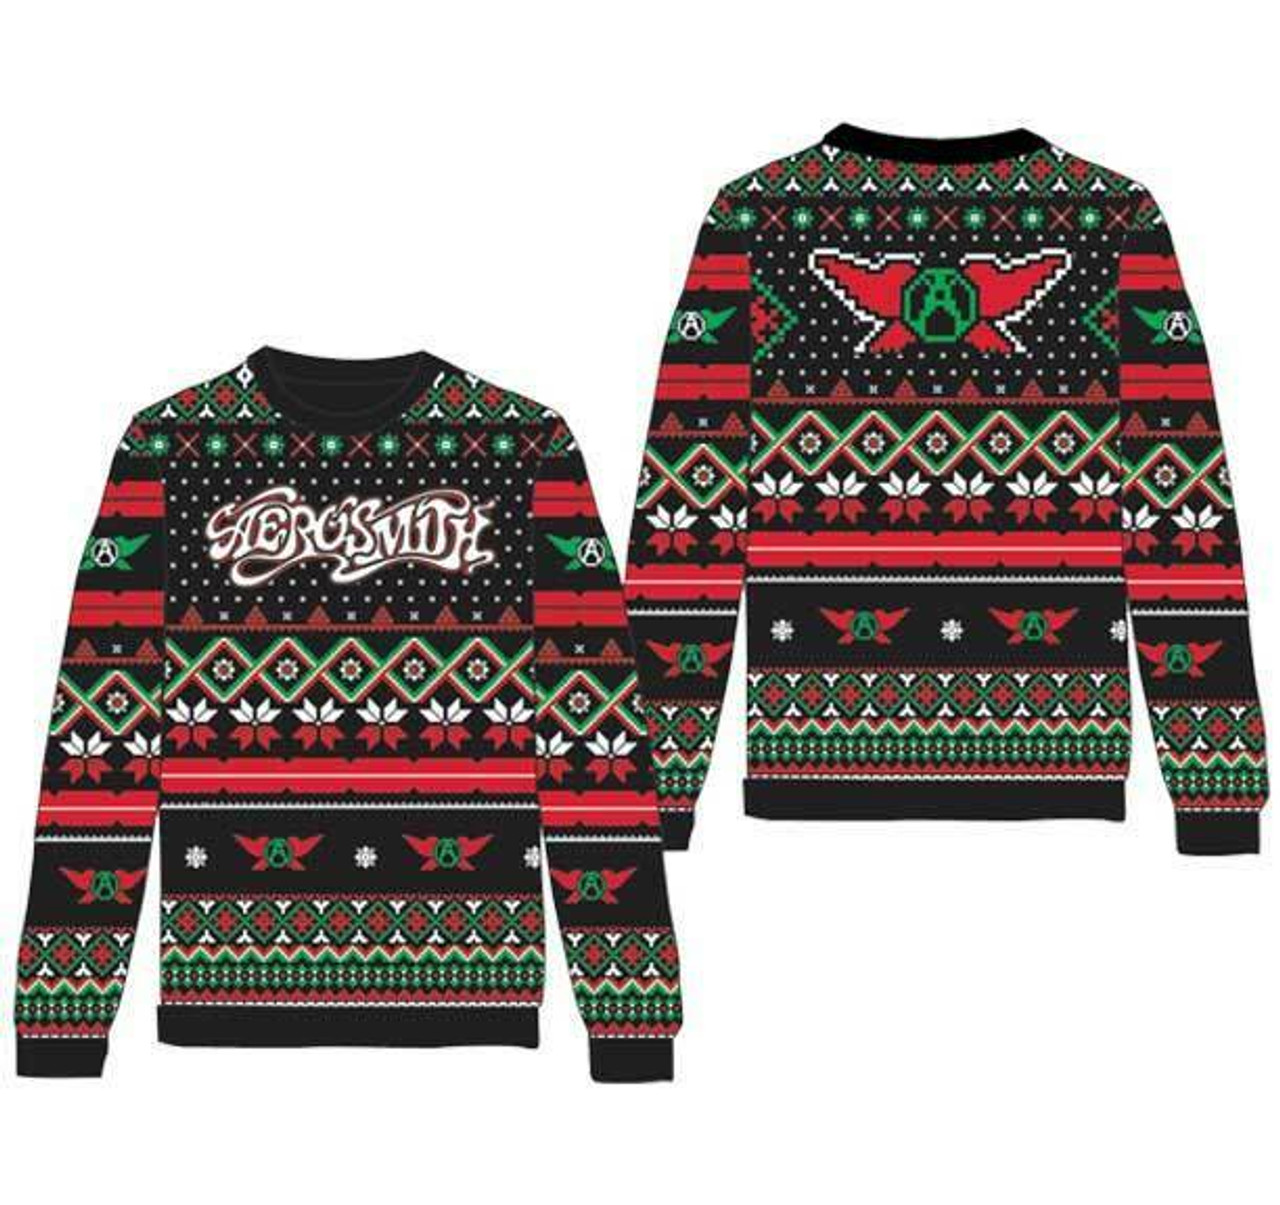 Aerosmith Rock and Holiday - Christmas Fearless Band Apparel Sweater Roll Music 838440093 Ugly